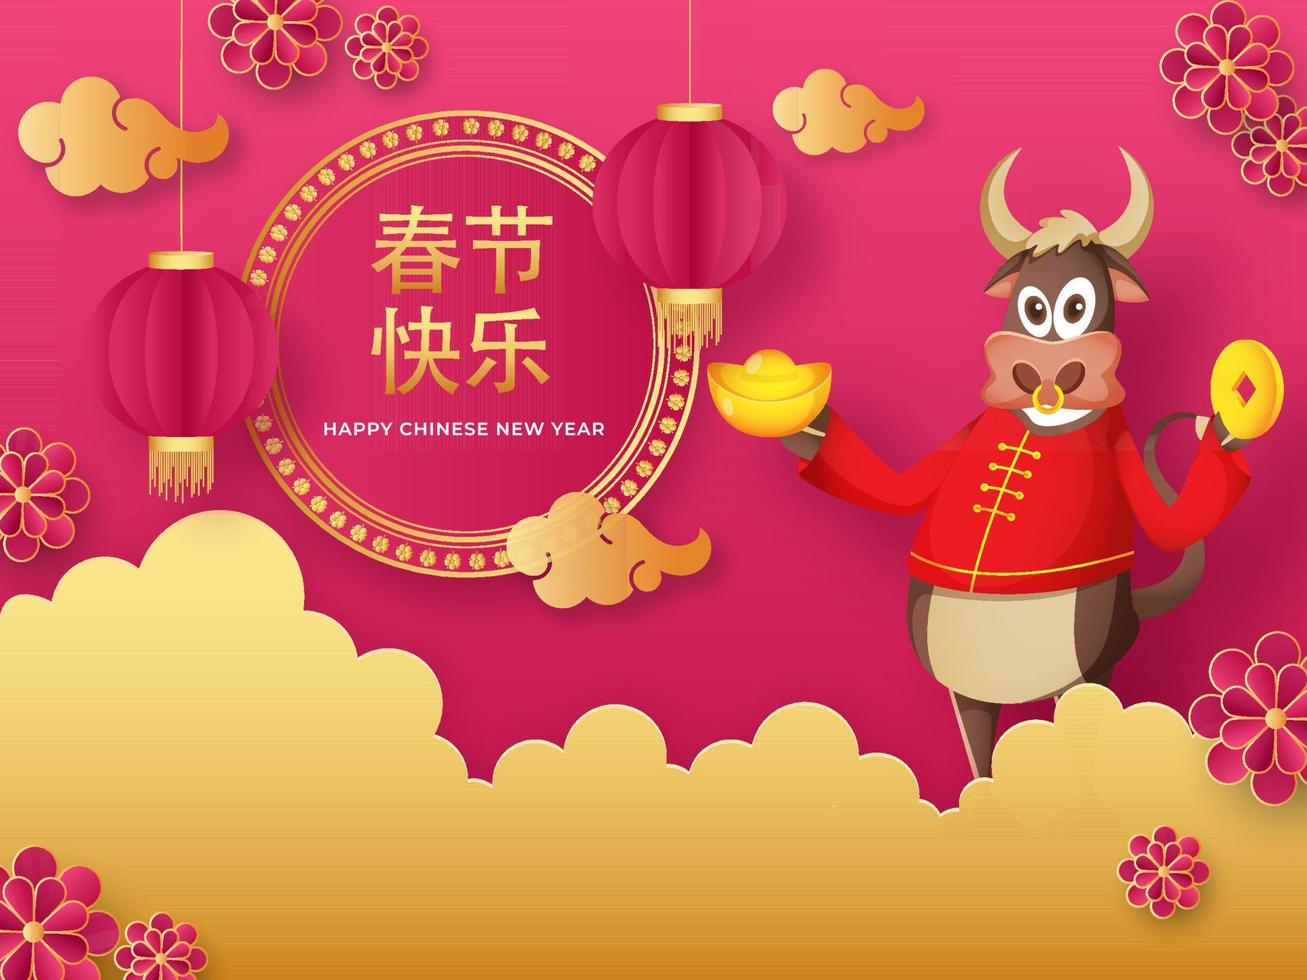 Cartoon Ox Holding Ingot With Qing Ming Coin, Paper Cut Lanterns Hang, Flowers And Golden Clouds On Pink Background For Chinese New Year. vector